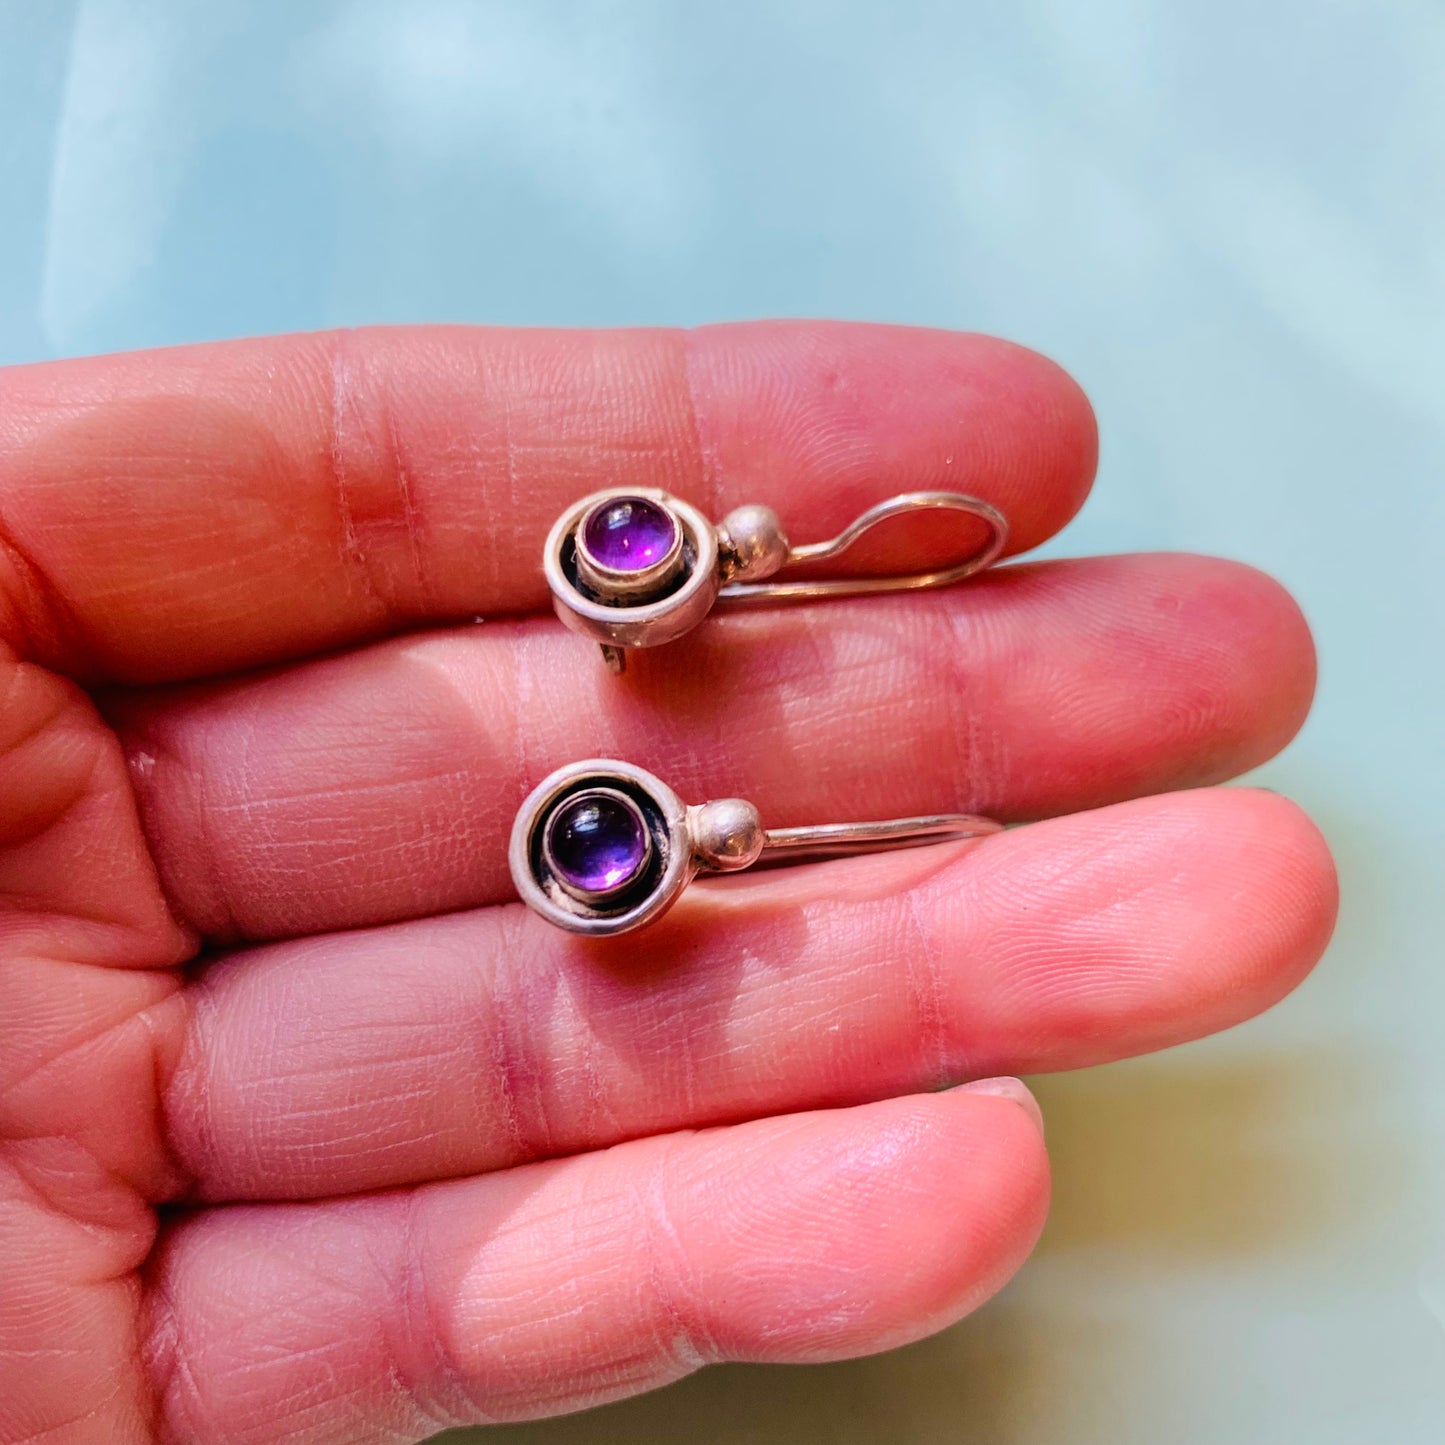 Antique sterling silver drop earrings with amethyst